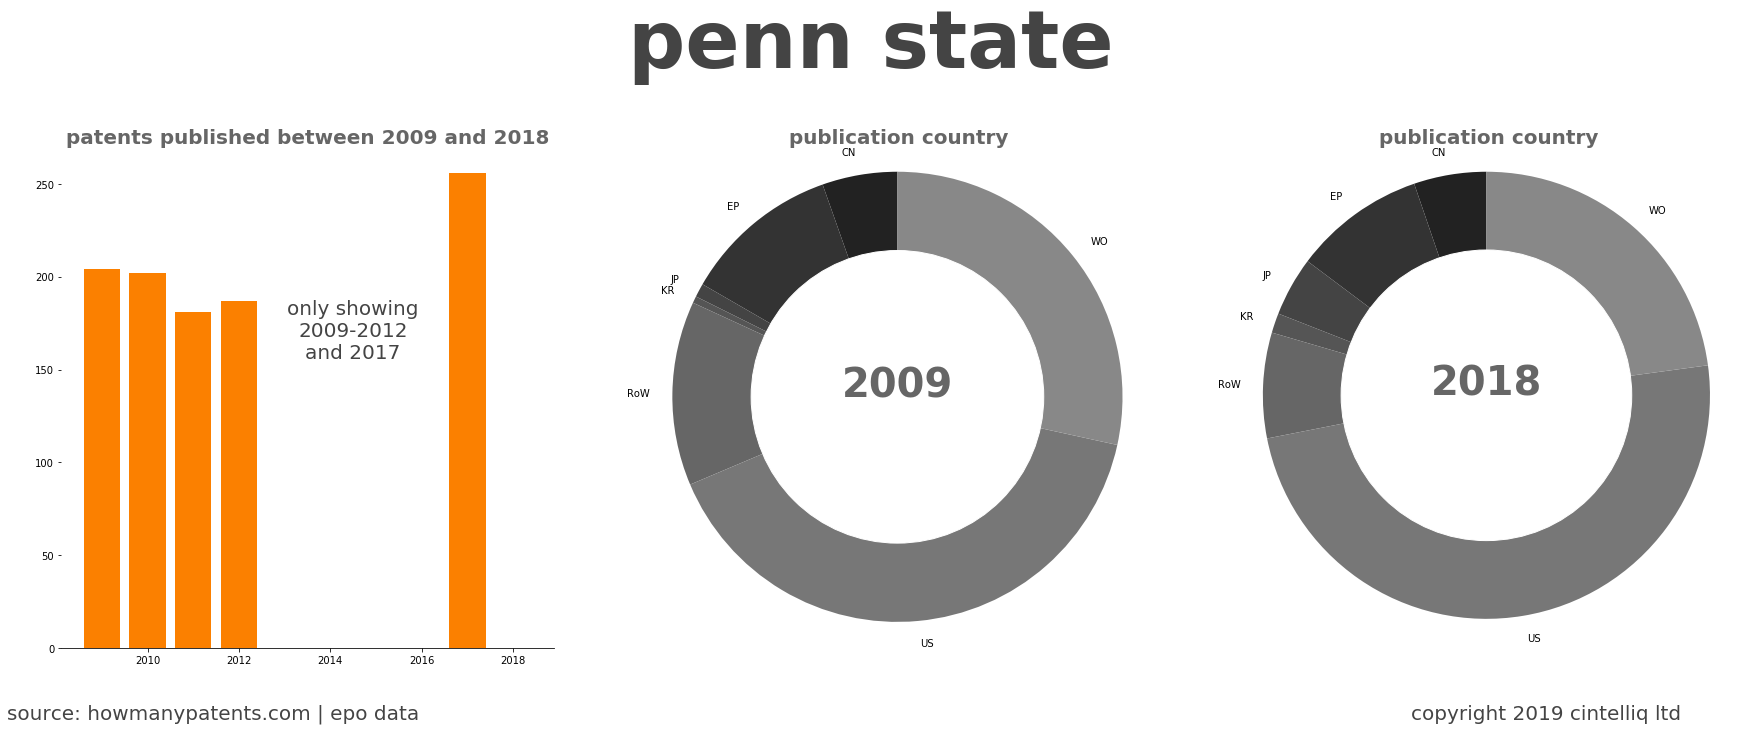 summary of patents for Penn State